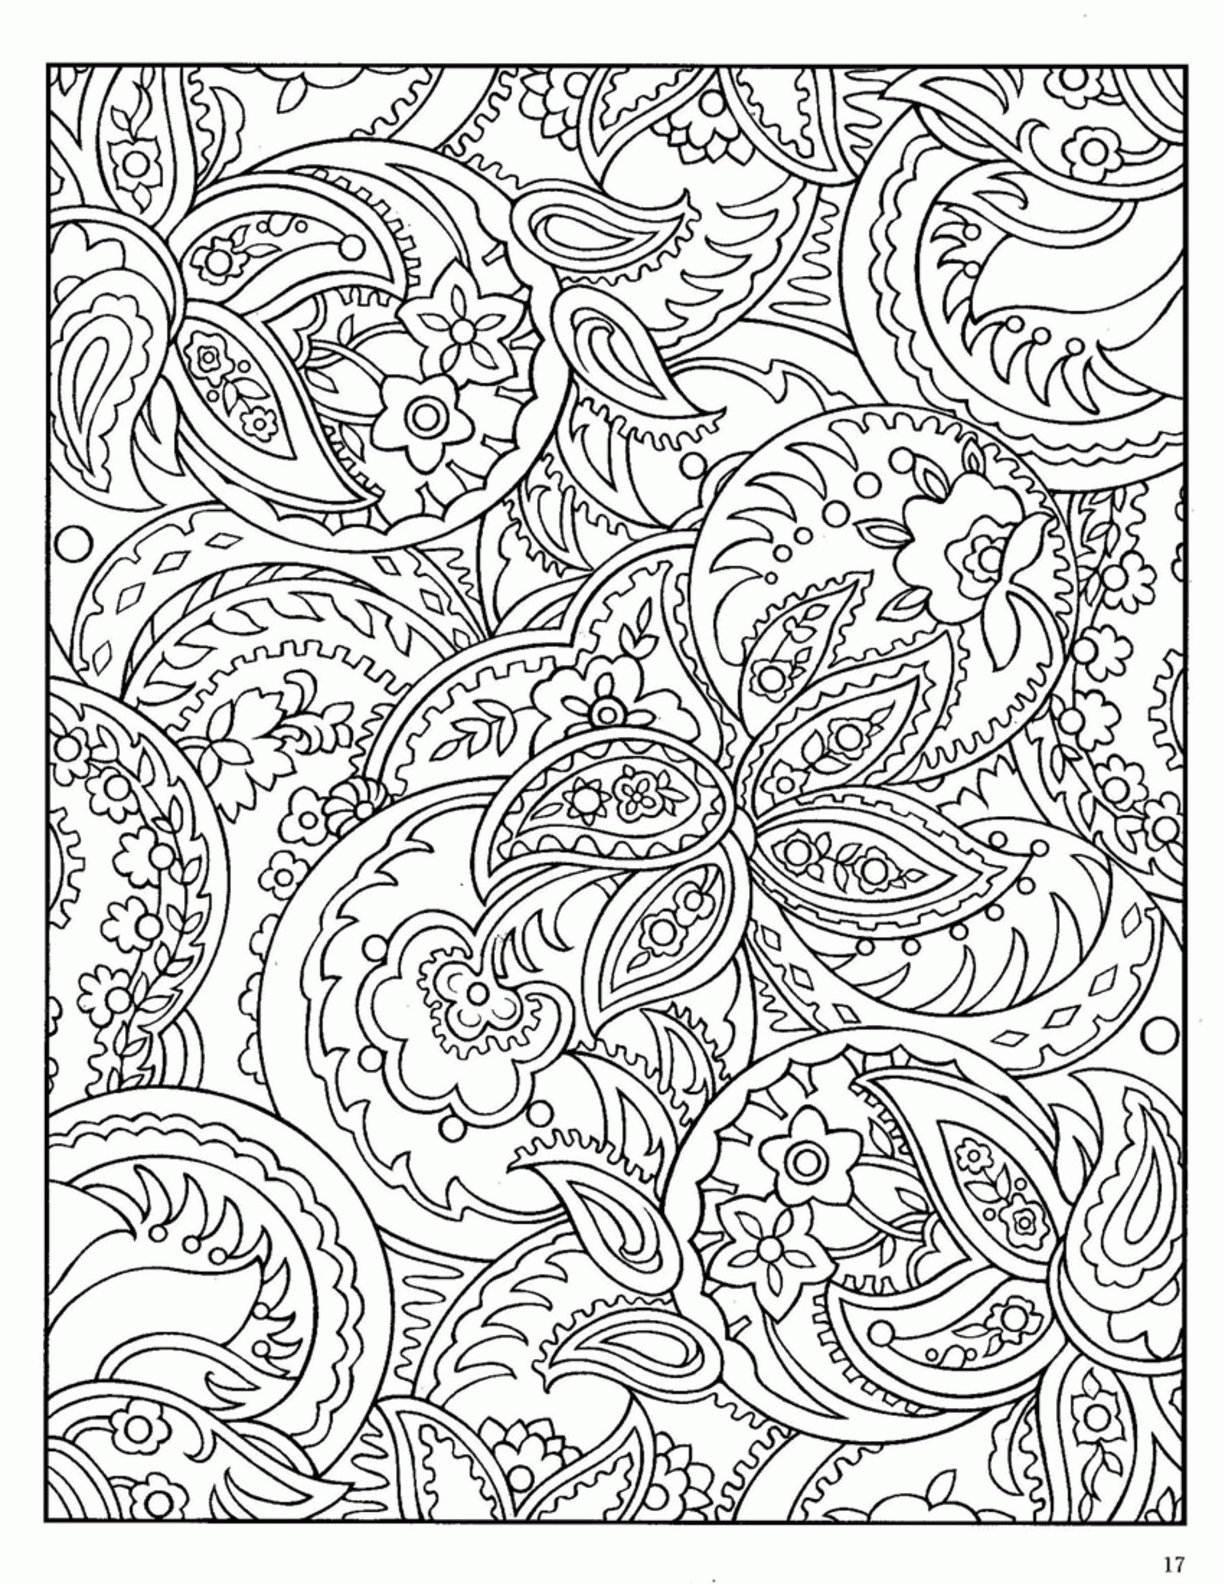 Paisley Coloring Page